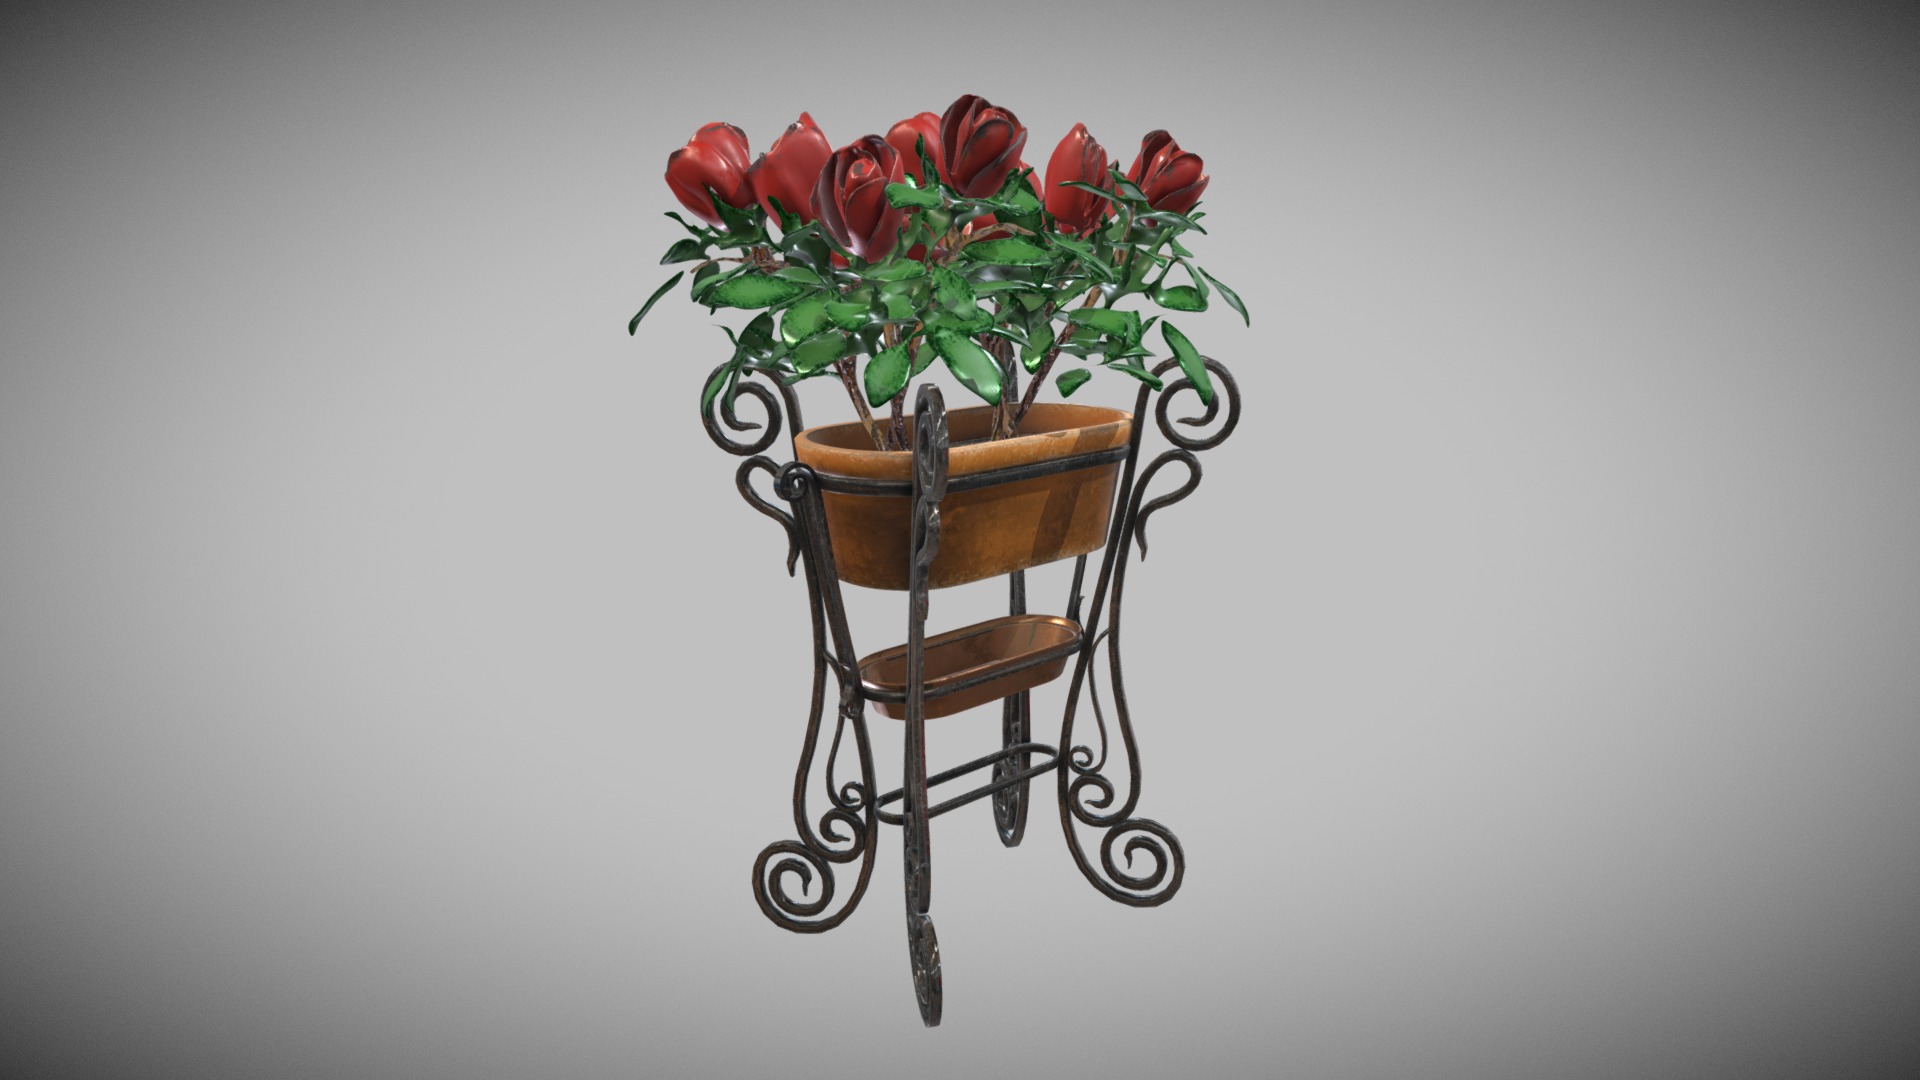 3D model Rose Garden Set – Support Ovulo - This is a 3D model of the Rose Garden Set - Support Ovulo. The 3D model is about a planter with red flowers.